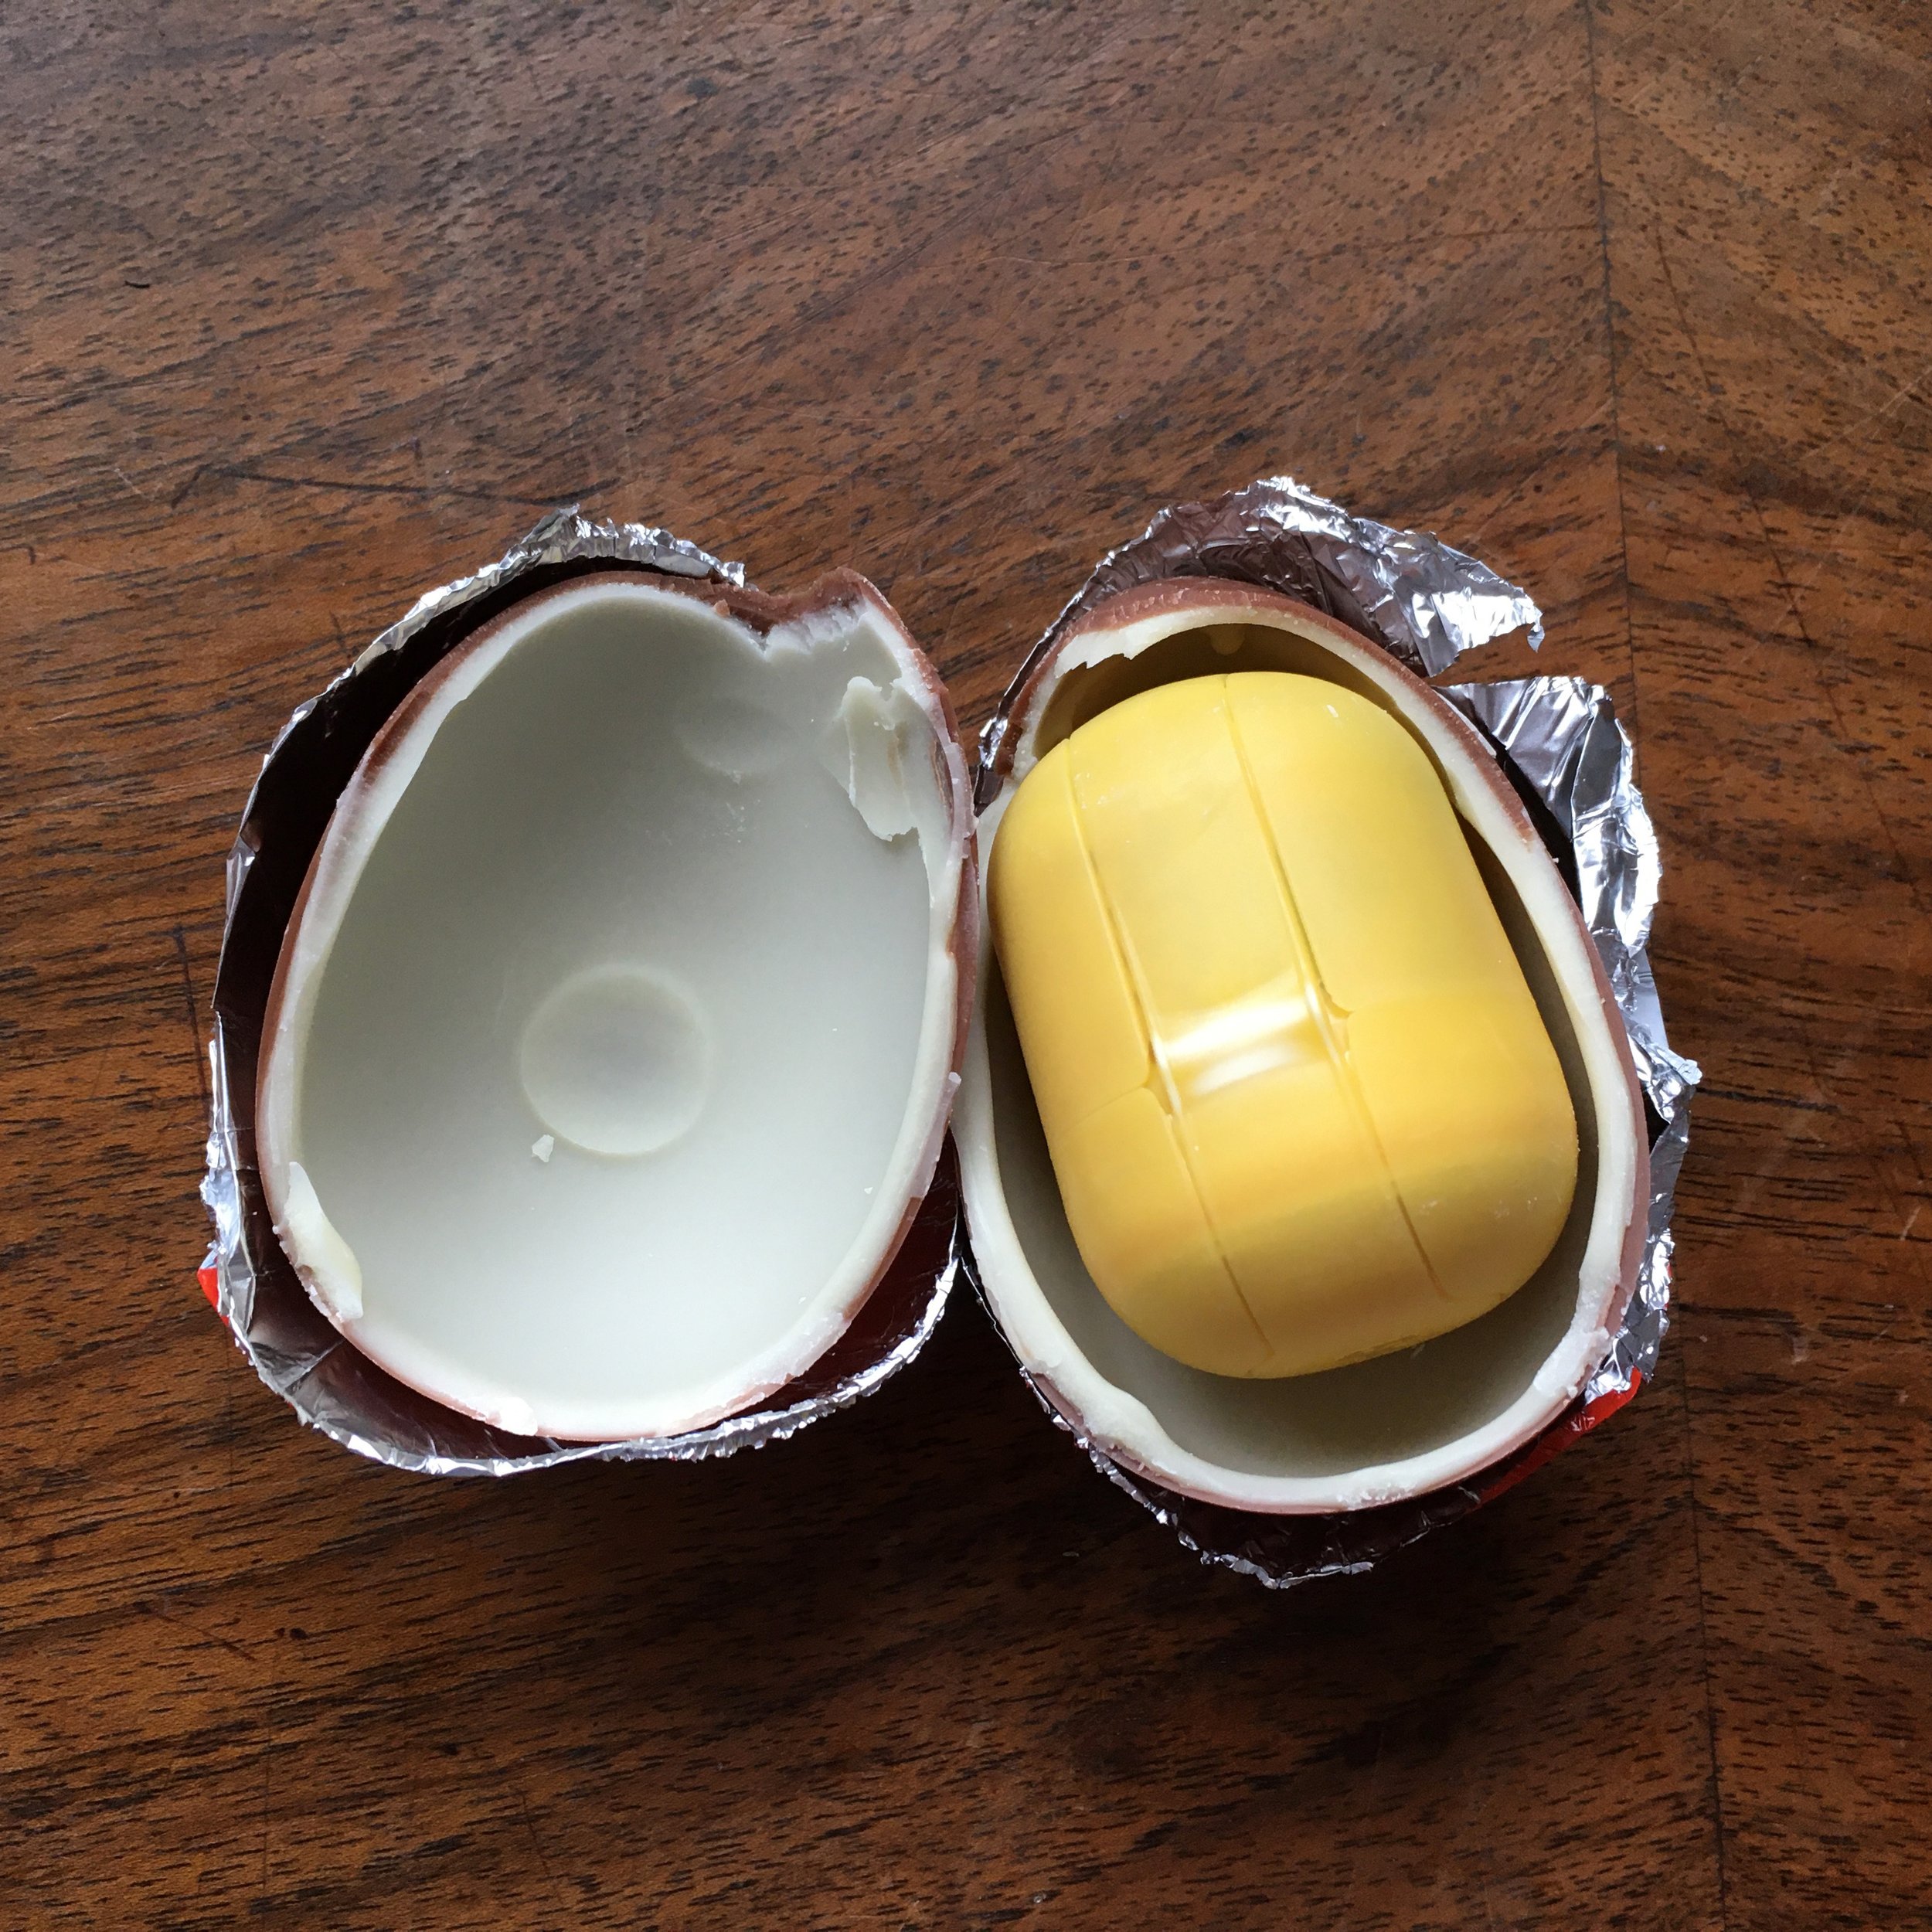  the chocolate egg opened up to reveal the yellow plastic capsule, AKA the yolk 